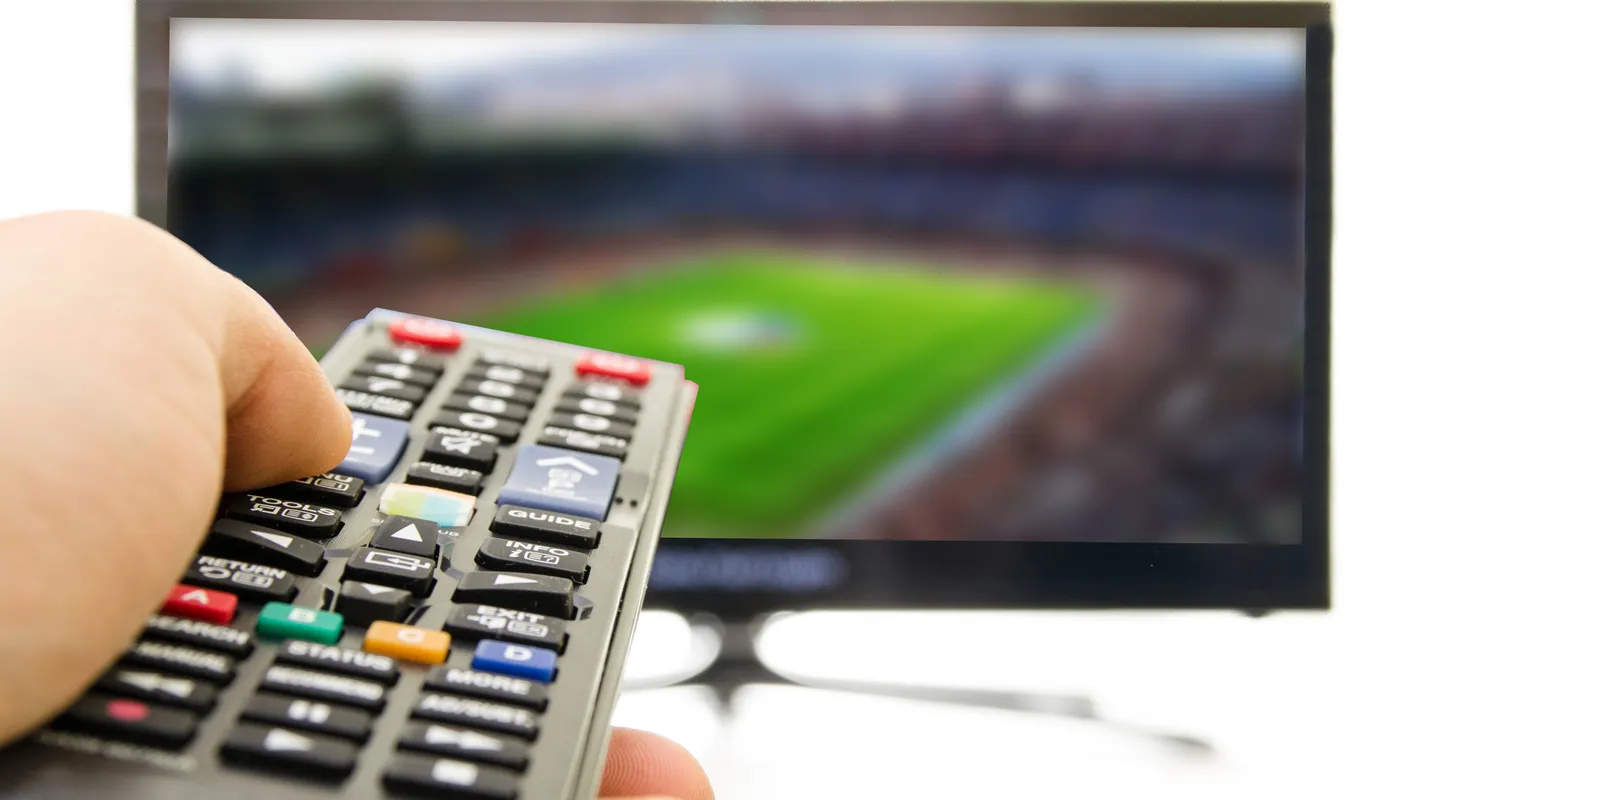 What Is The Firms Total Revenue When Selling Cable Television To 6 Houses?